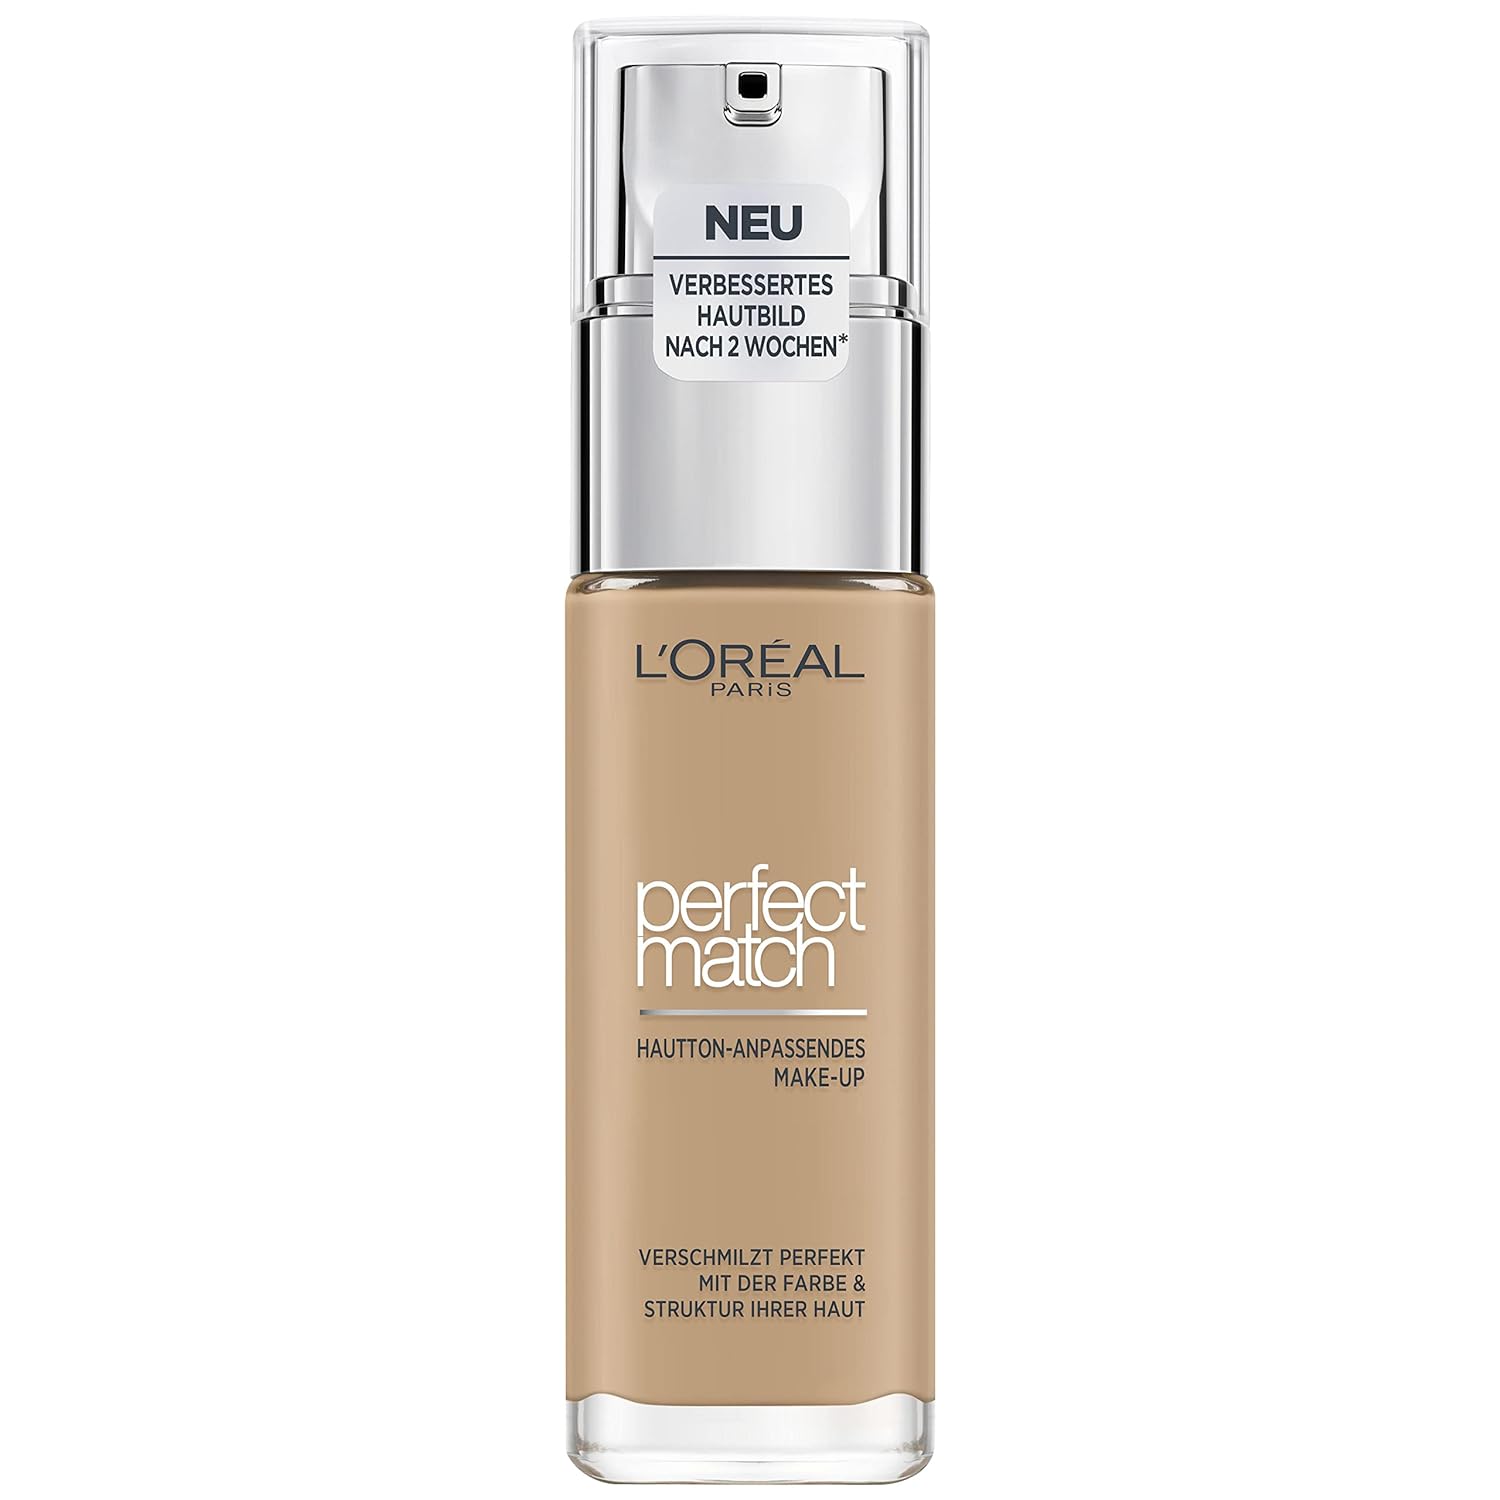 L \ 'Oréal Paris Perfect Make-up 3.D/3.W Golden Beige, Liquid Foundation with Hyaluron and Aloe Vera, 30 ml